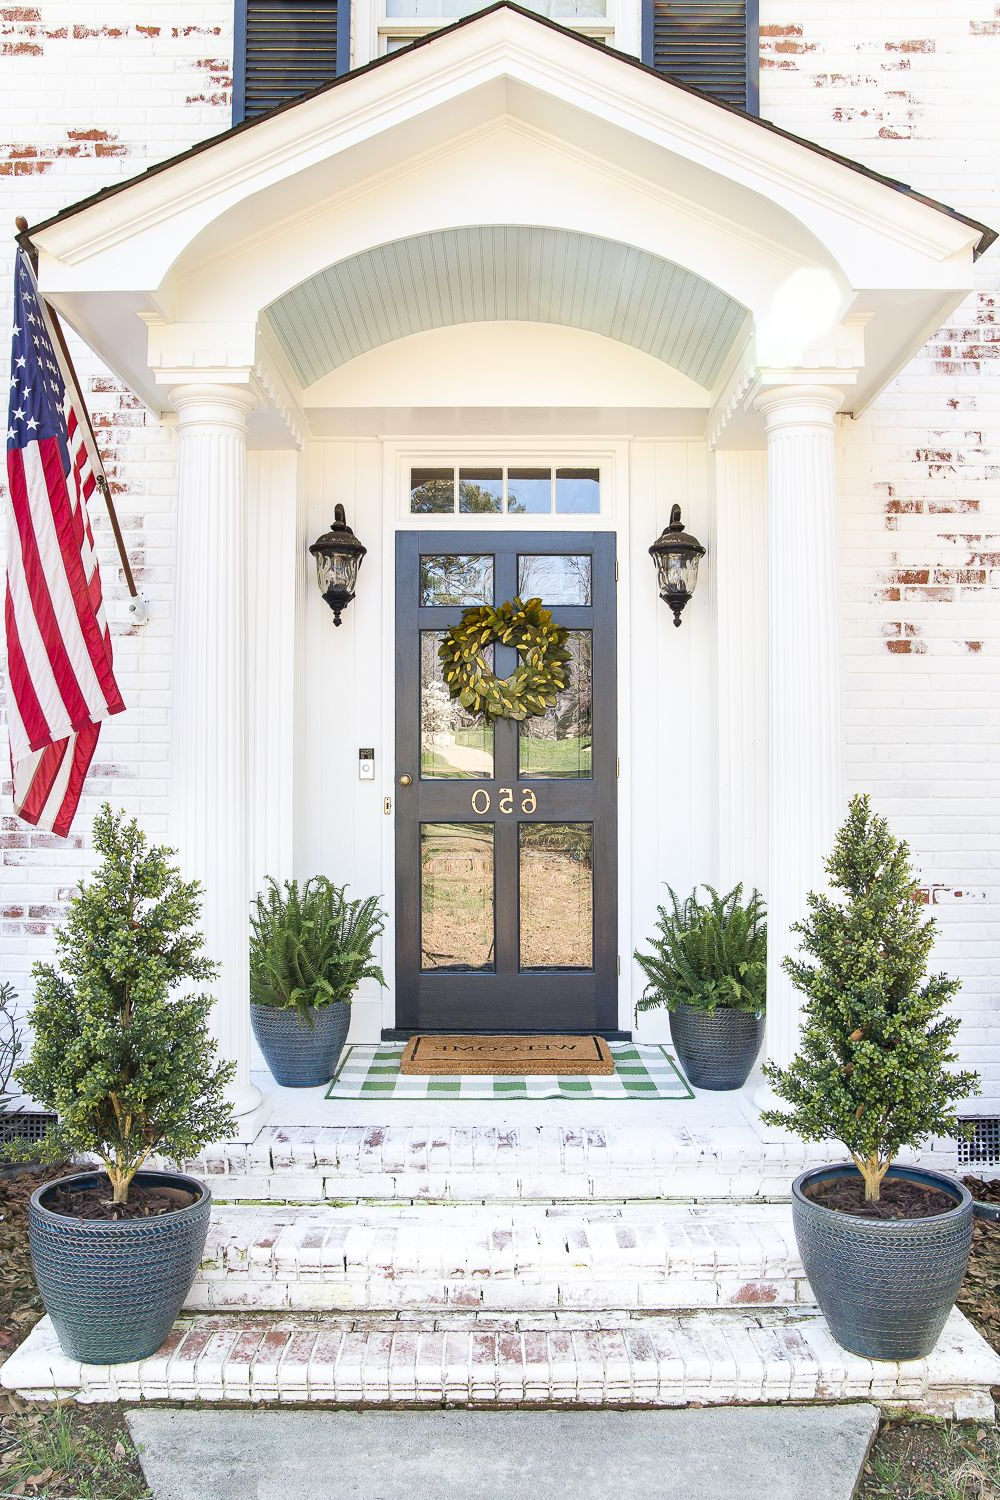 How To Decorate A Small Porch Stoop In 4 Easy Steps